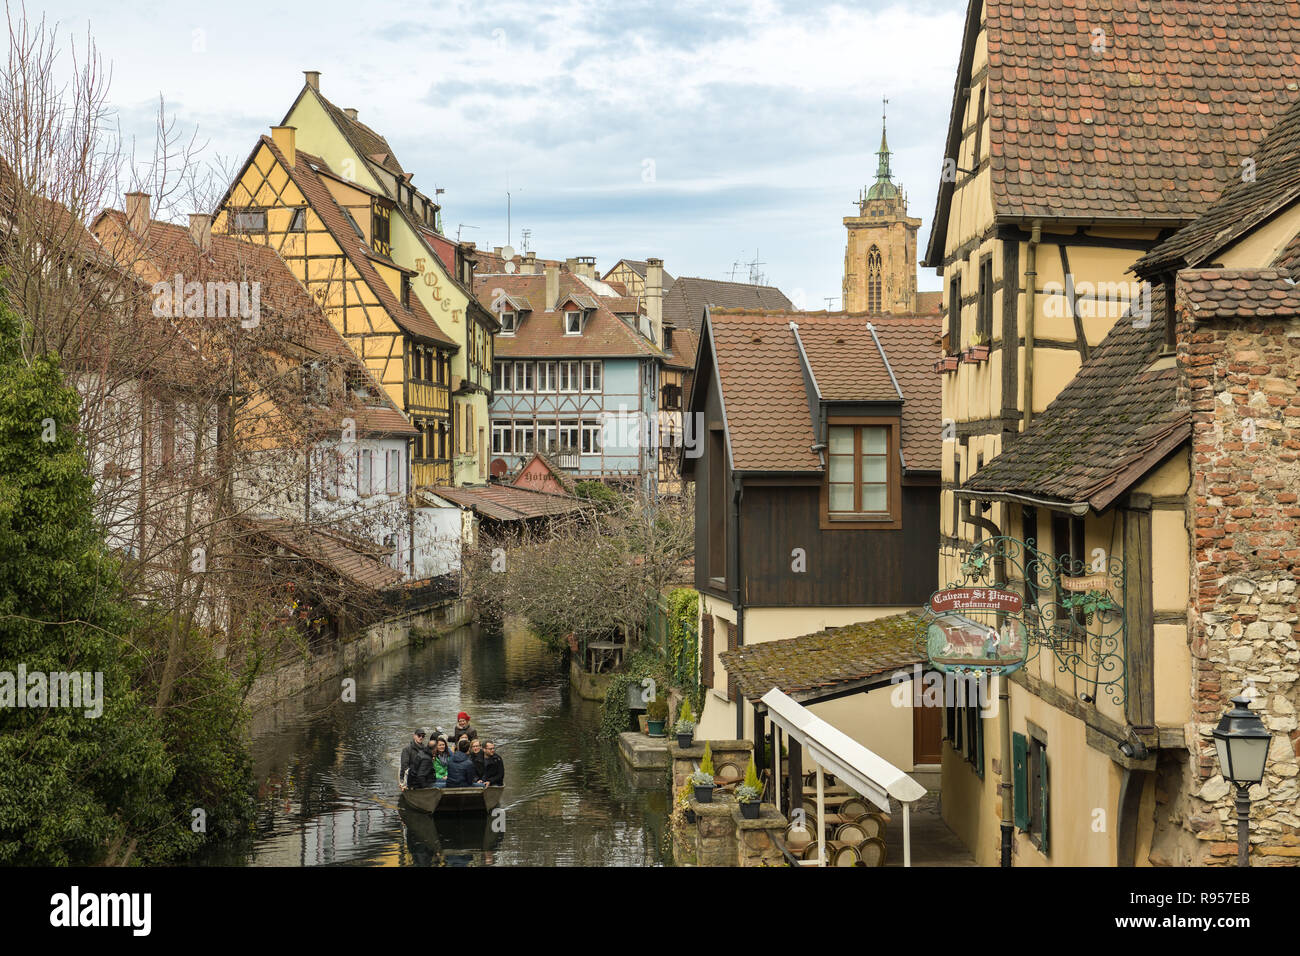 COLMAR, FRANCE - APRIL 2, 2018: Tourists enjoying beautiful cruise on water canal in Little Venice quarter in Colmar, France during Easter 2018 Stock Photo